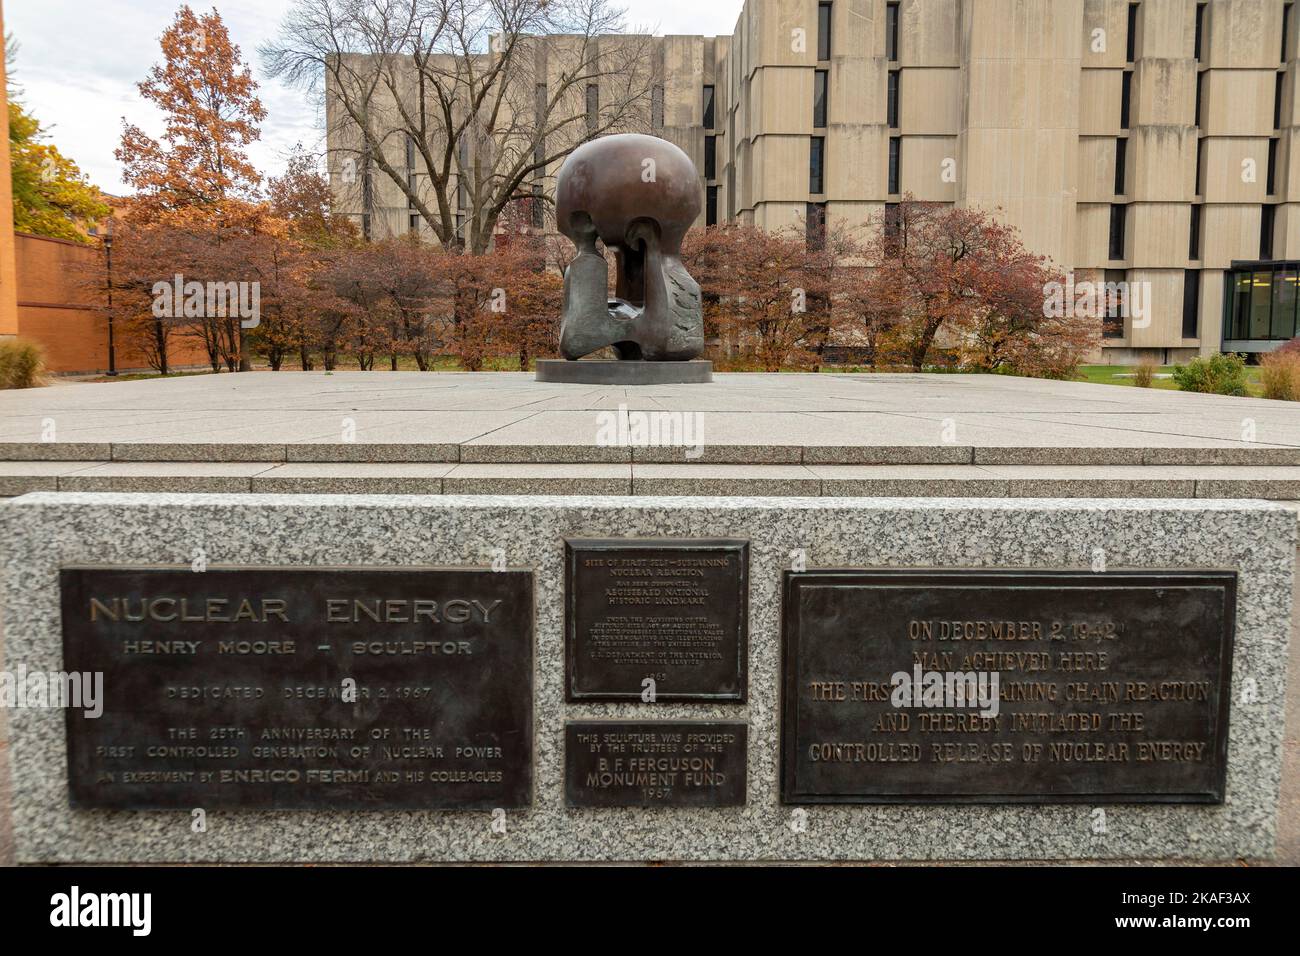 Chicago, Illinois - 'Nuclear Energy,' a sculpture by Henry Moore, on the site of the first controlled nuclear chain reaction, which opened the door to Stock Photo